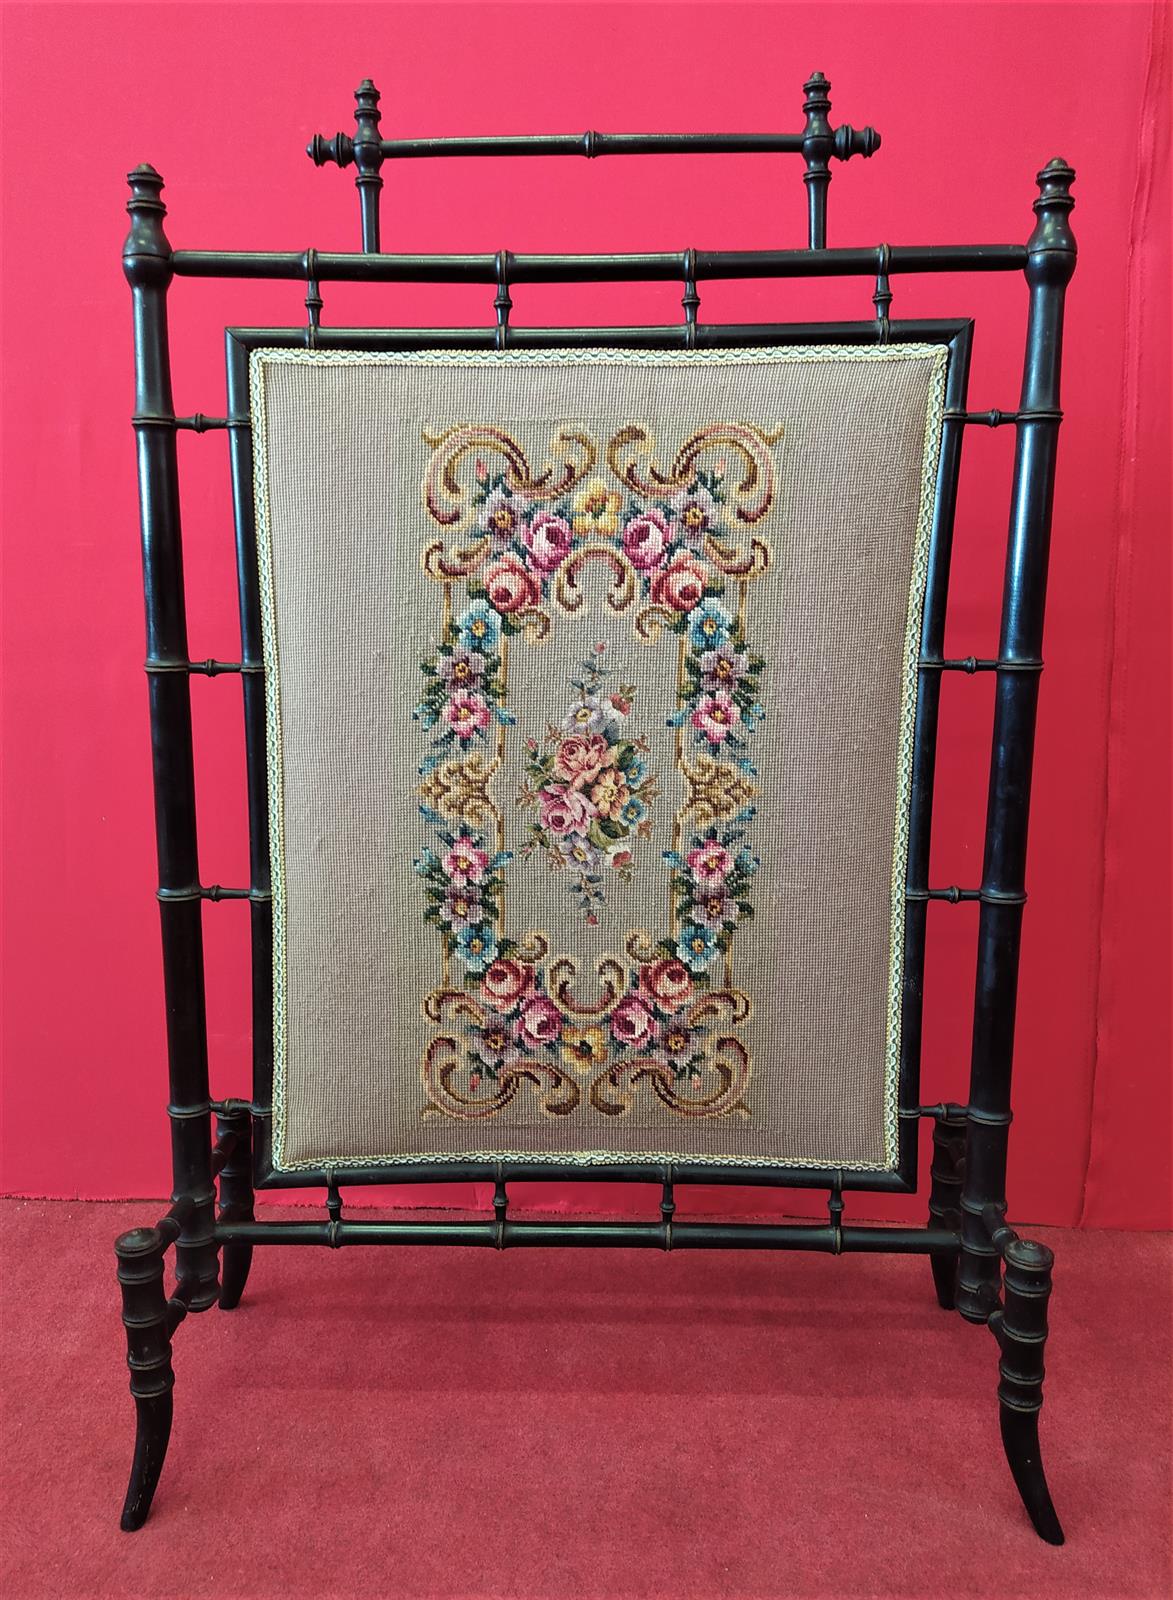 Fireplace screen with embroidered fabric